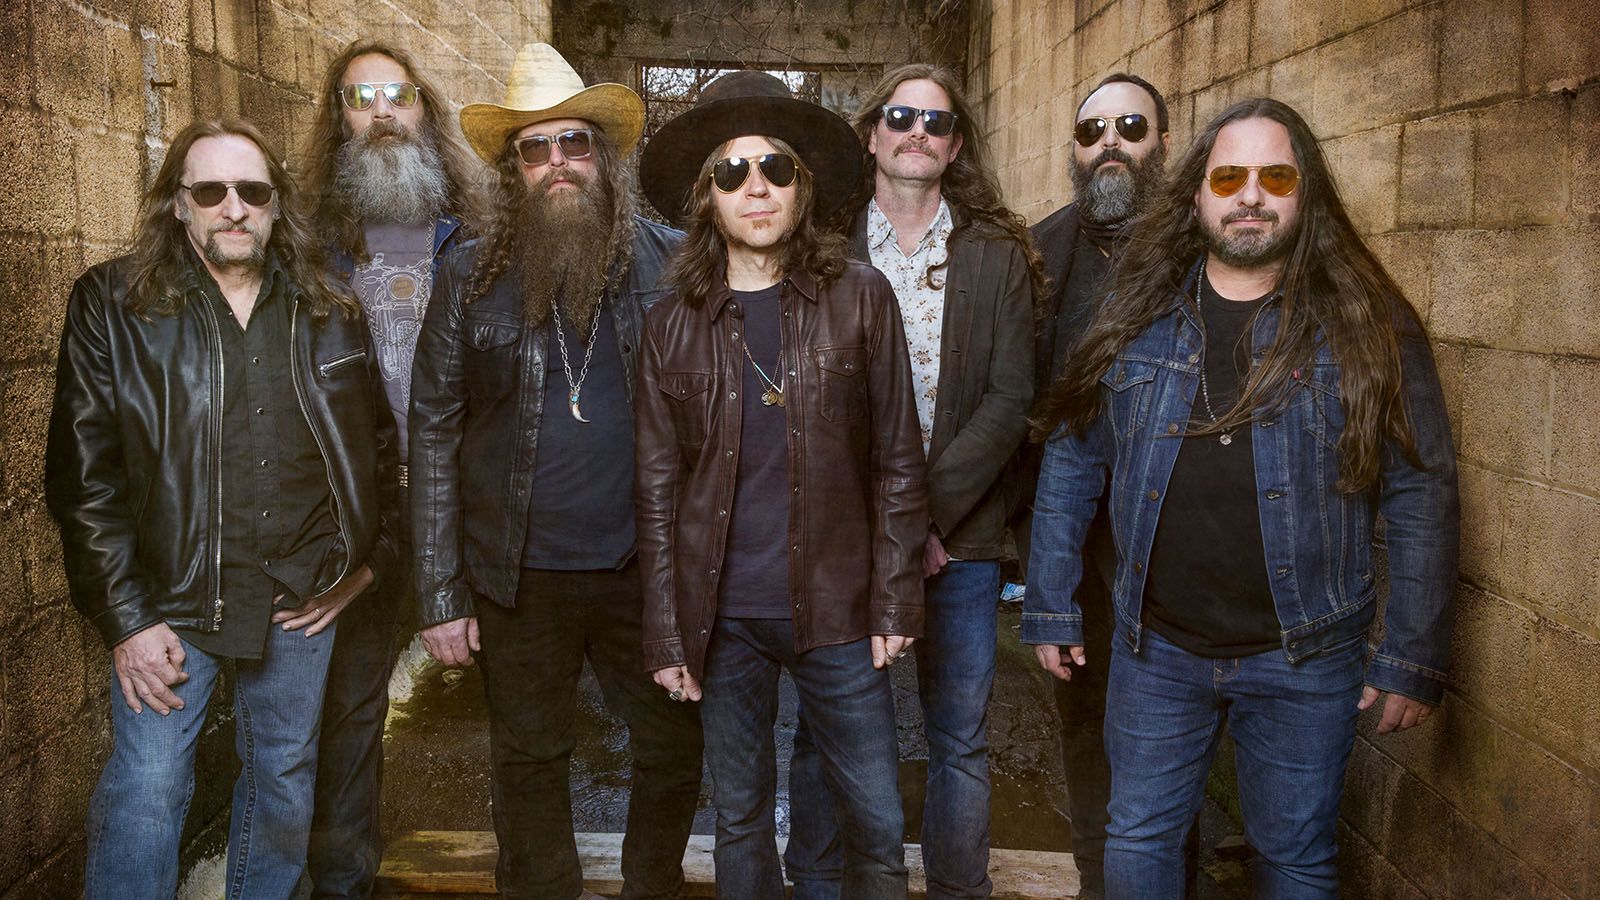 Blackberry Smoke will be at Sweetwater Performance Pavilion on July 26.